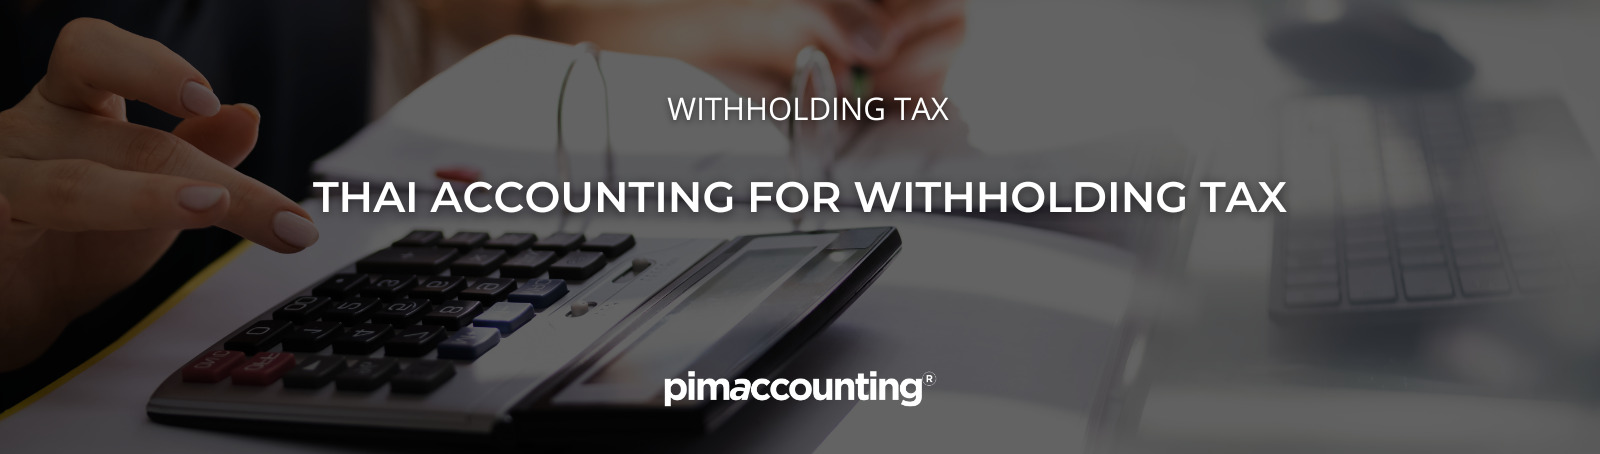 Thai Accounting for Withholding Tax